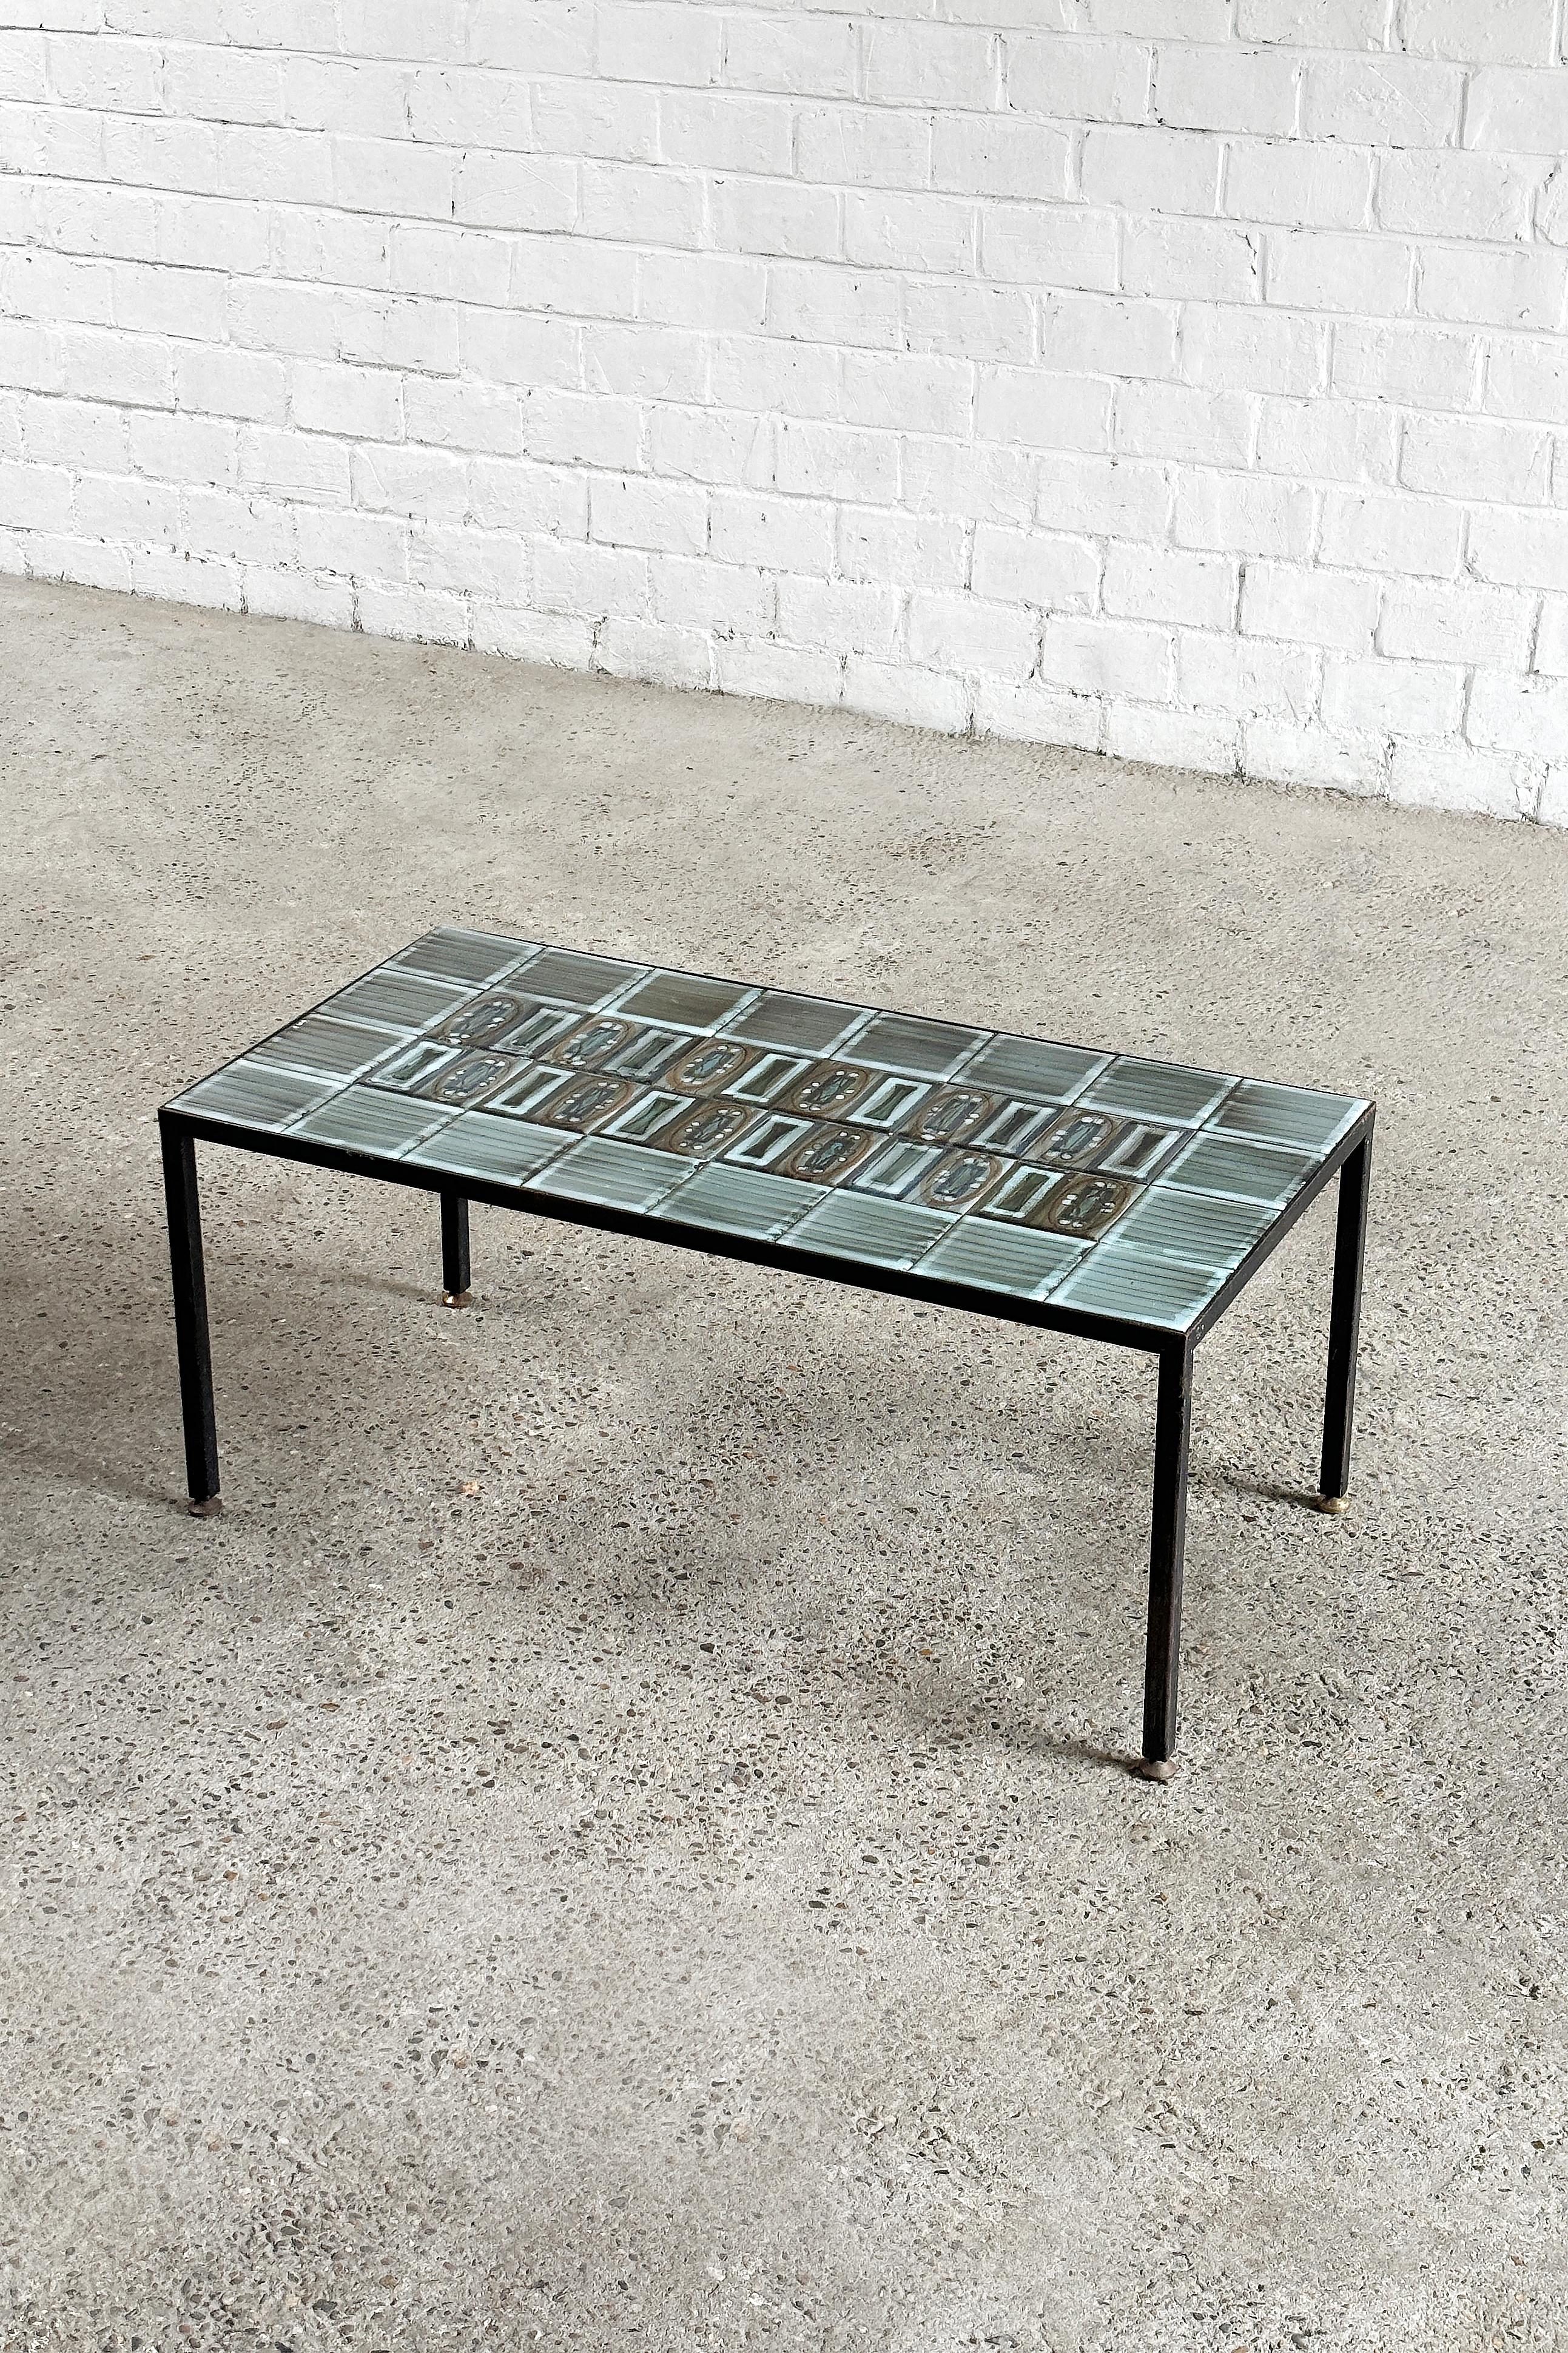 Coffee table in black lacquered metal with decorative ceramic tiles in gray, blue and green tones. French work from the 1960's. This table is attributed to ceramist Jean de Lespinasse, notable for the close resemblance in ceramic patterns and